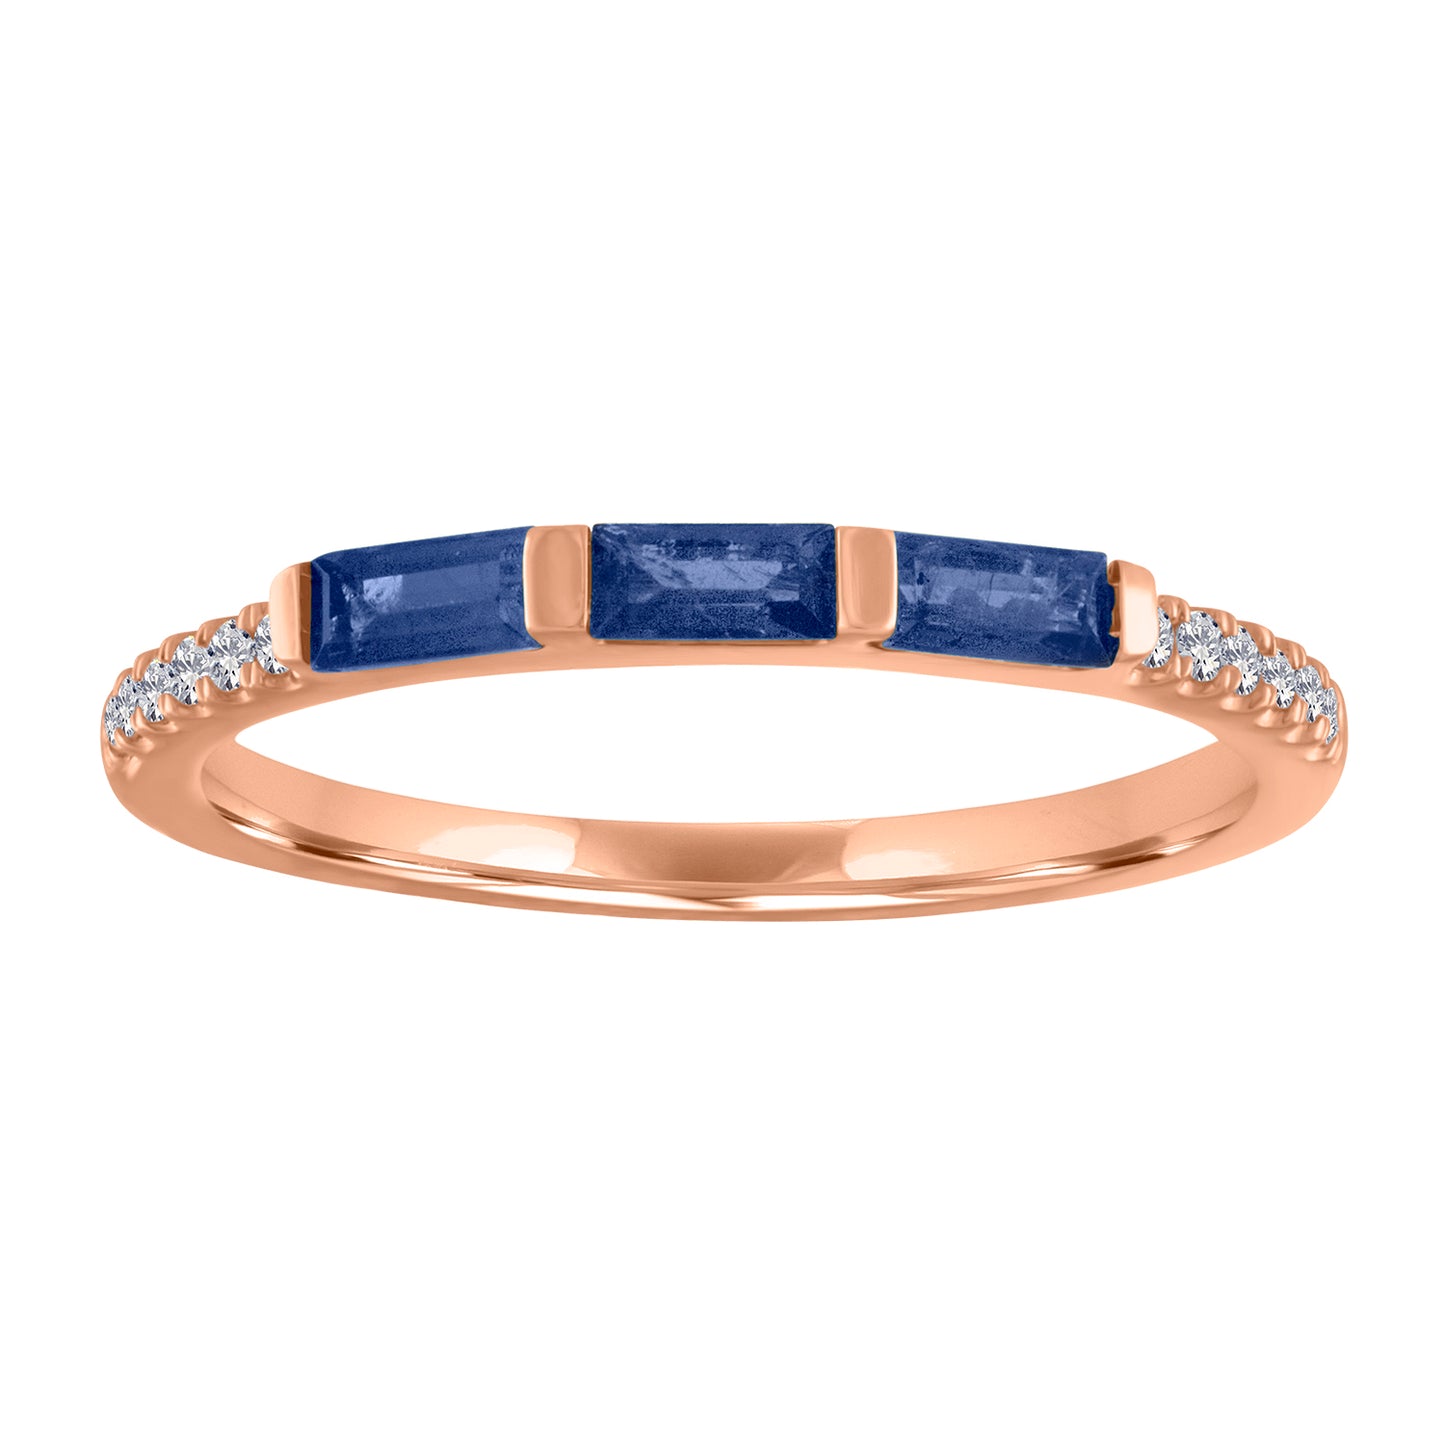 Rose gold skinny band with three sapphire baguettes and round diamonds on the shank.